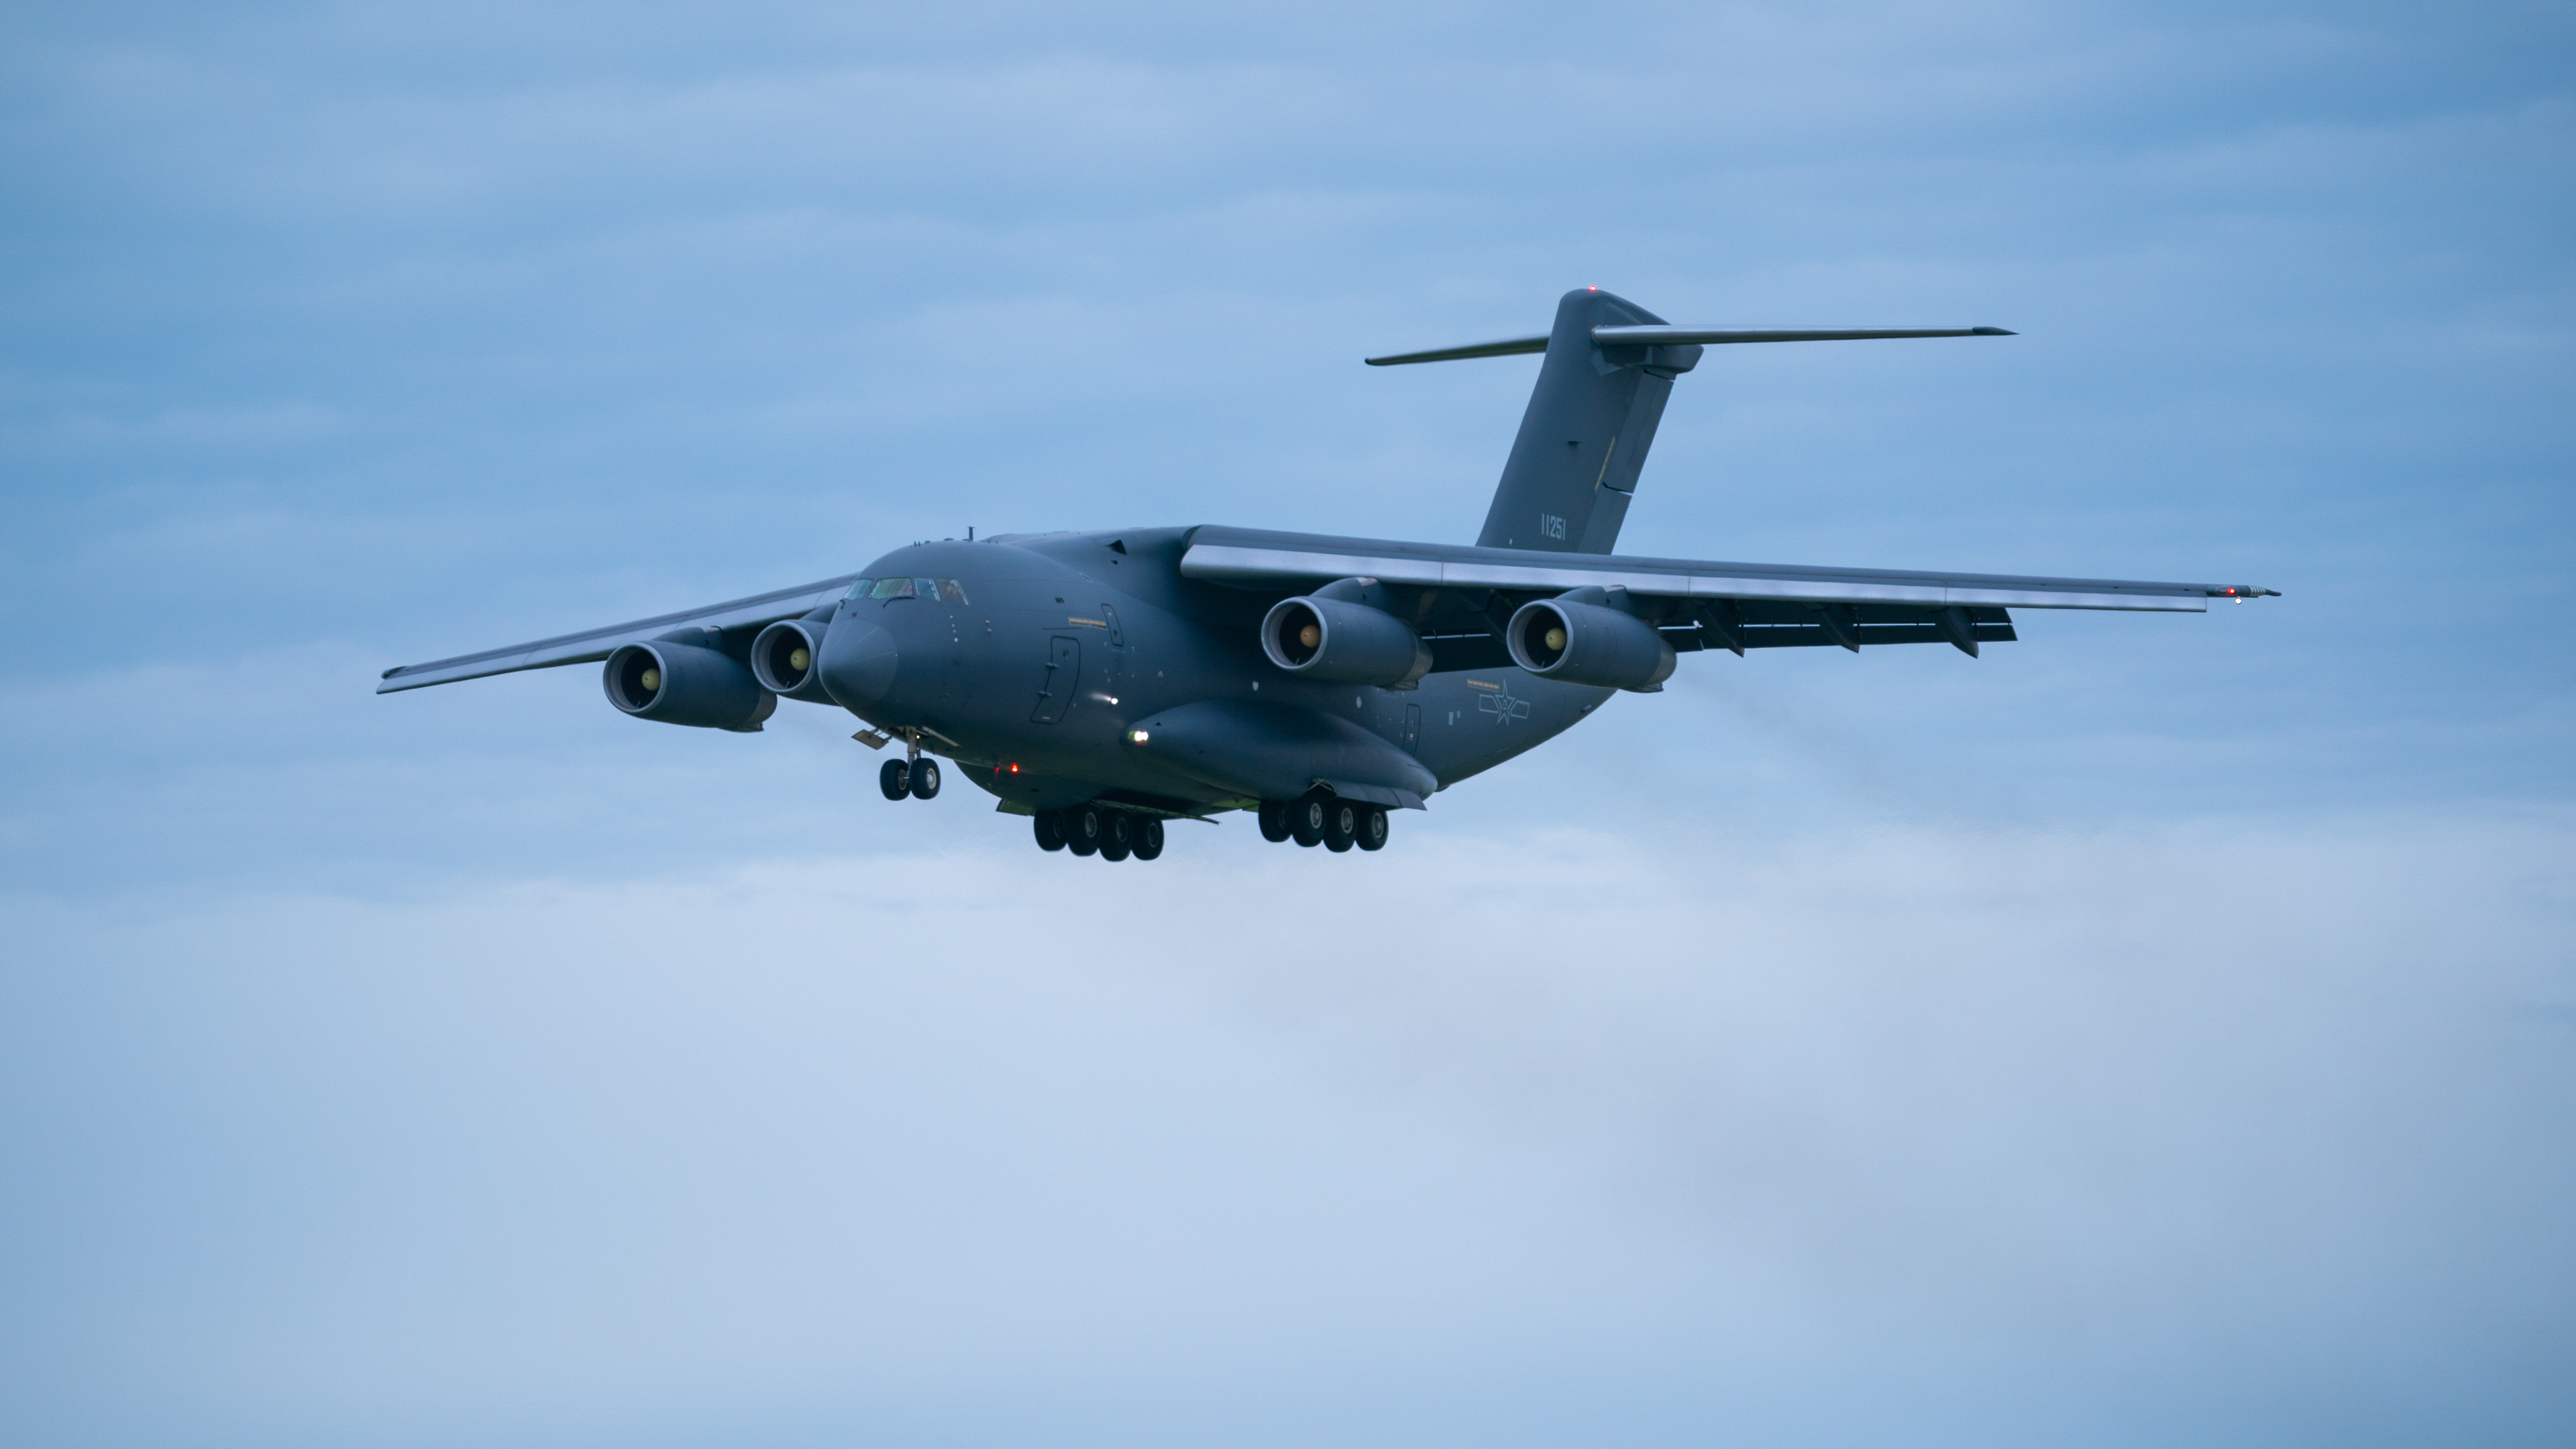 General 3840x2160 PLAAF military aircraft Xian Y-20 military vehicle vehicle flying sky clouds aircraft